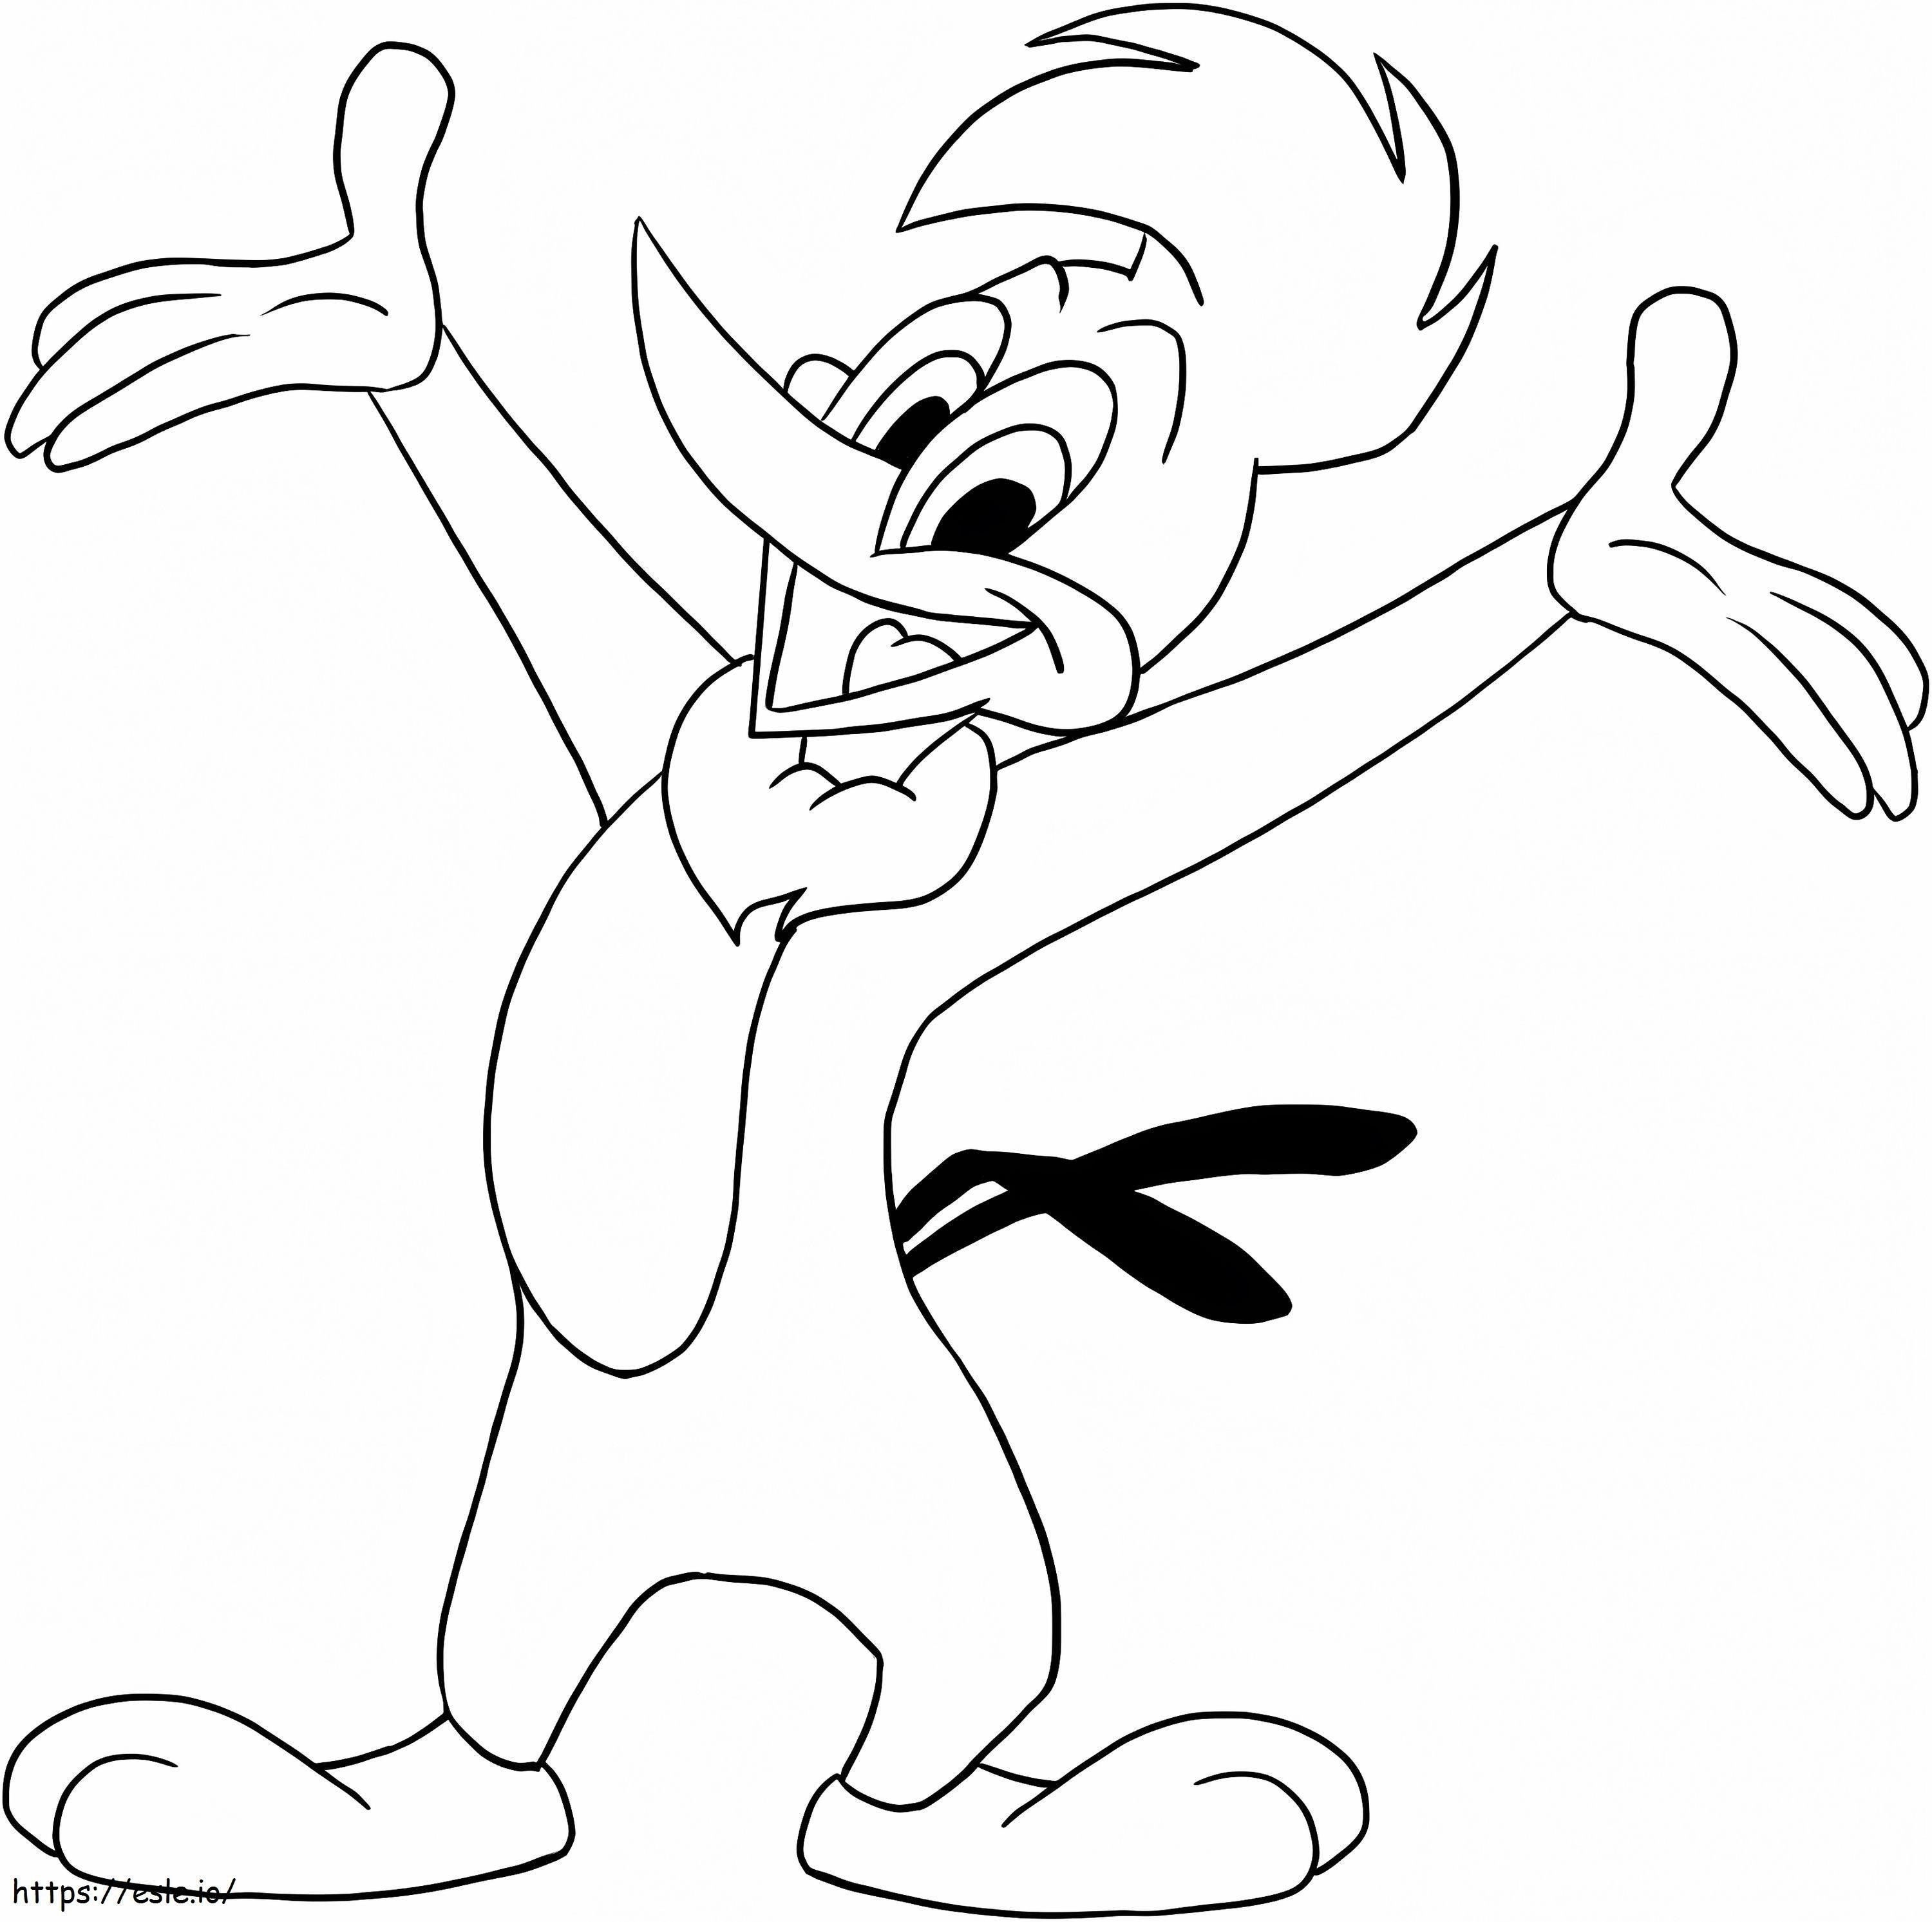 Happy Woody Woodpecker coloring page